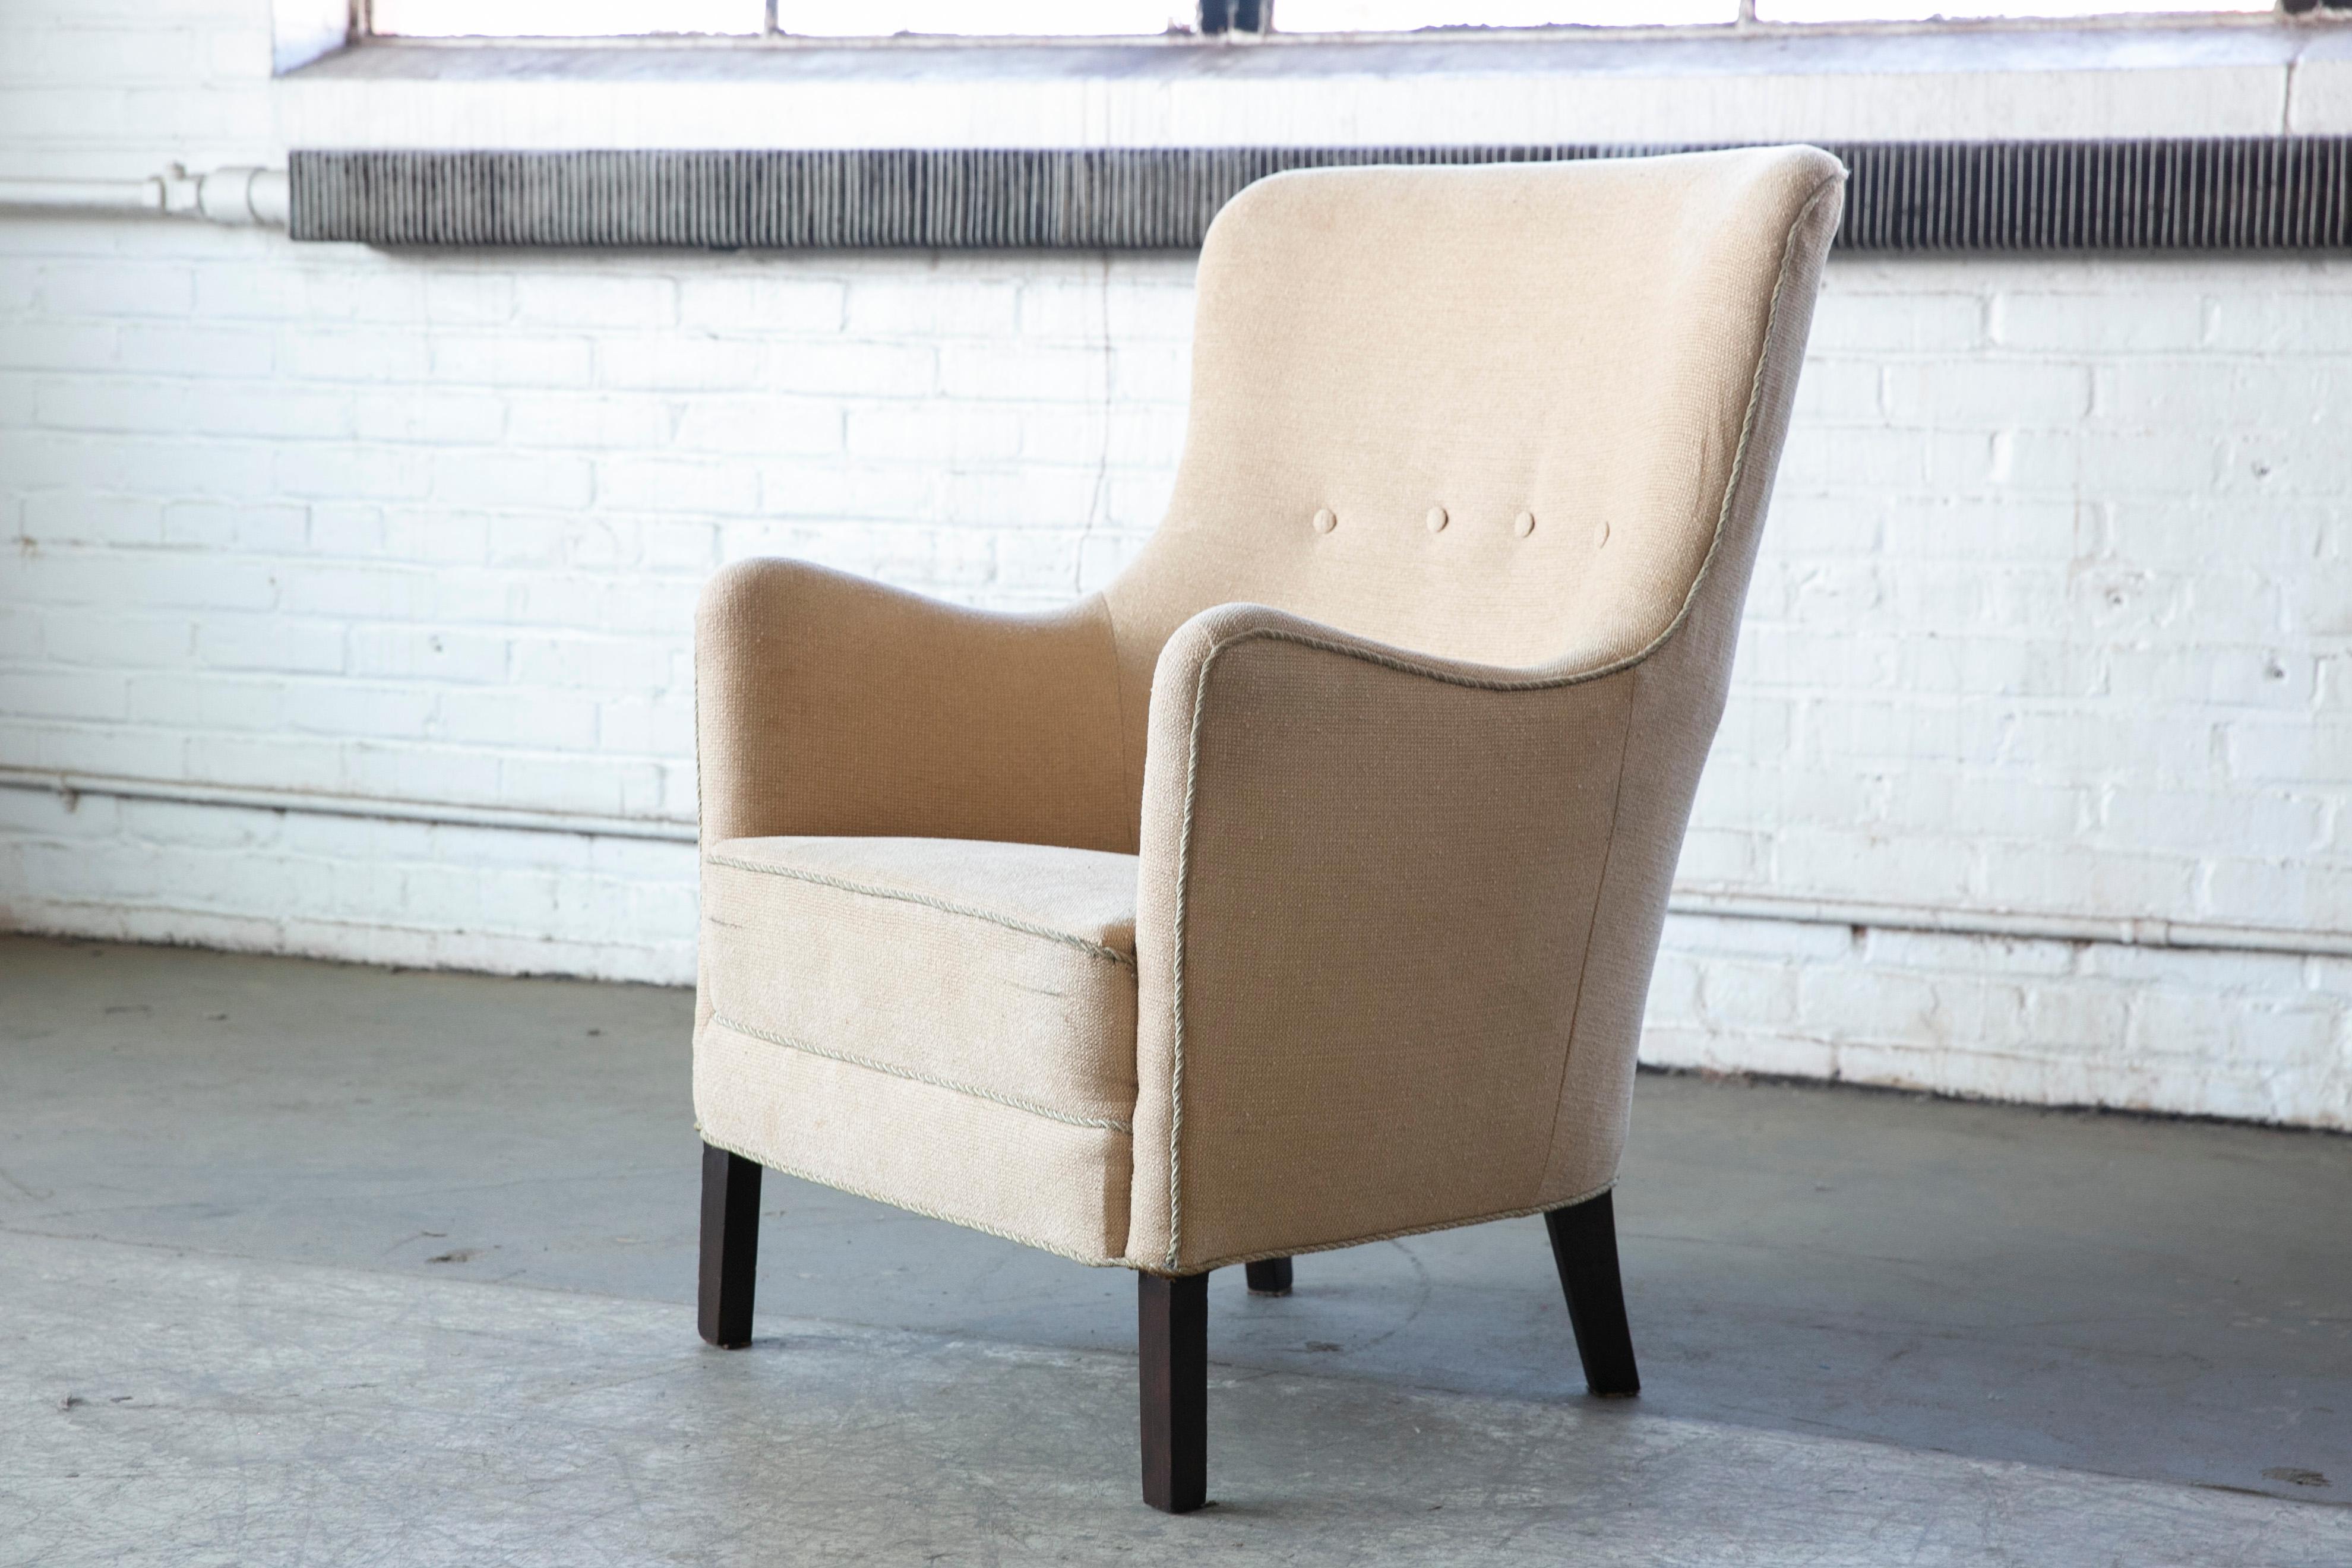 Elegant 1950s lounge chair attributed to Peter Hvidt and Orla Molgaard made in Denmark around 1950. Comfortable and sturdy re-upholstered at a later point, however showing just minor wear and remains in usable condition. Raised on beech legs. Some